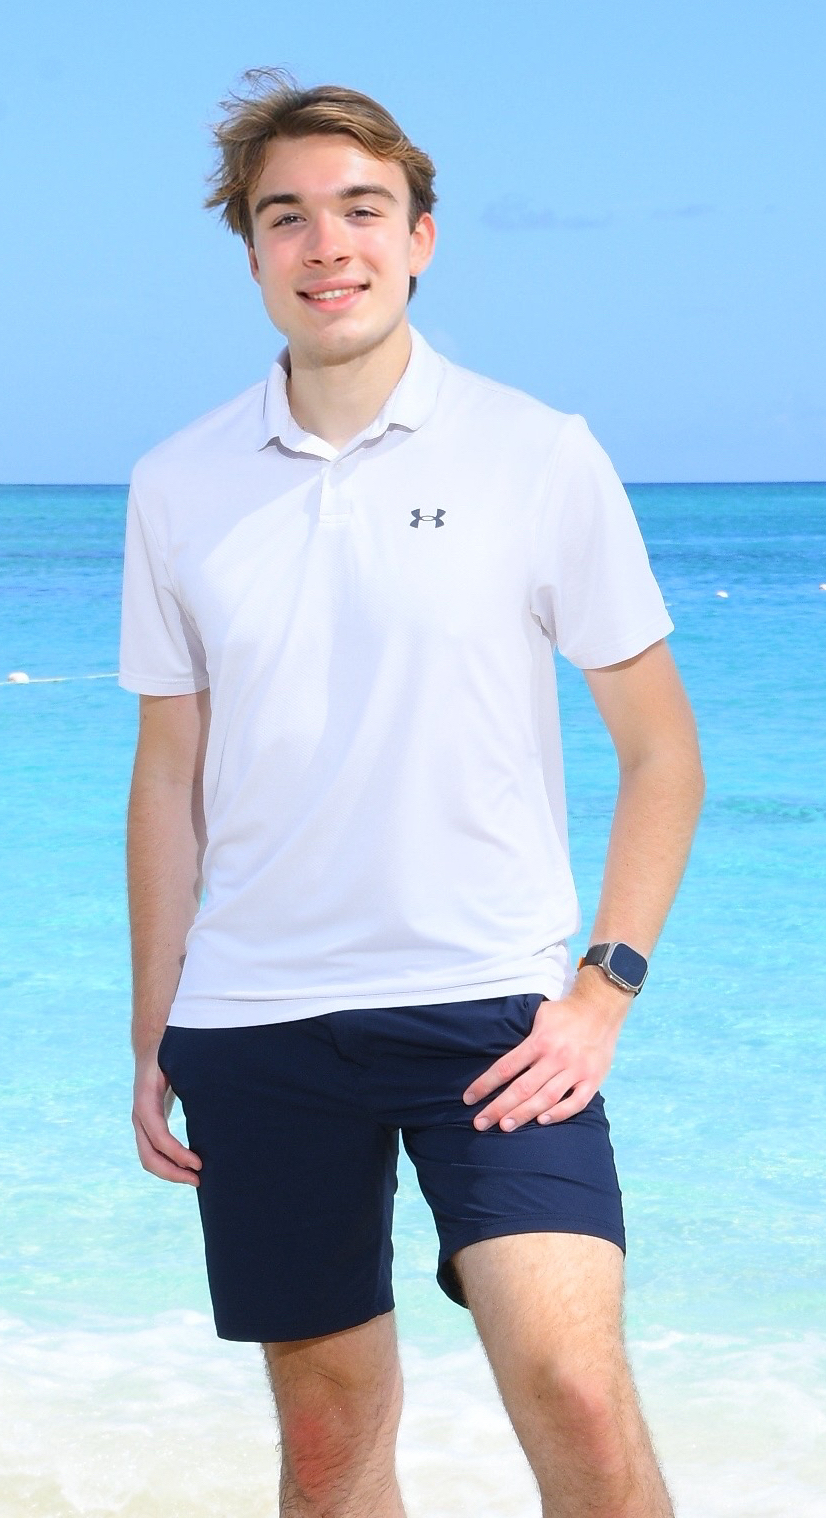 Me standing on a beach at Turks and Caicos.